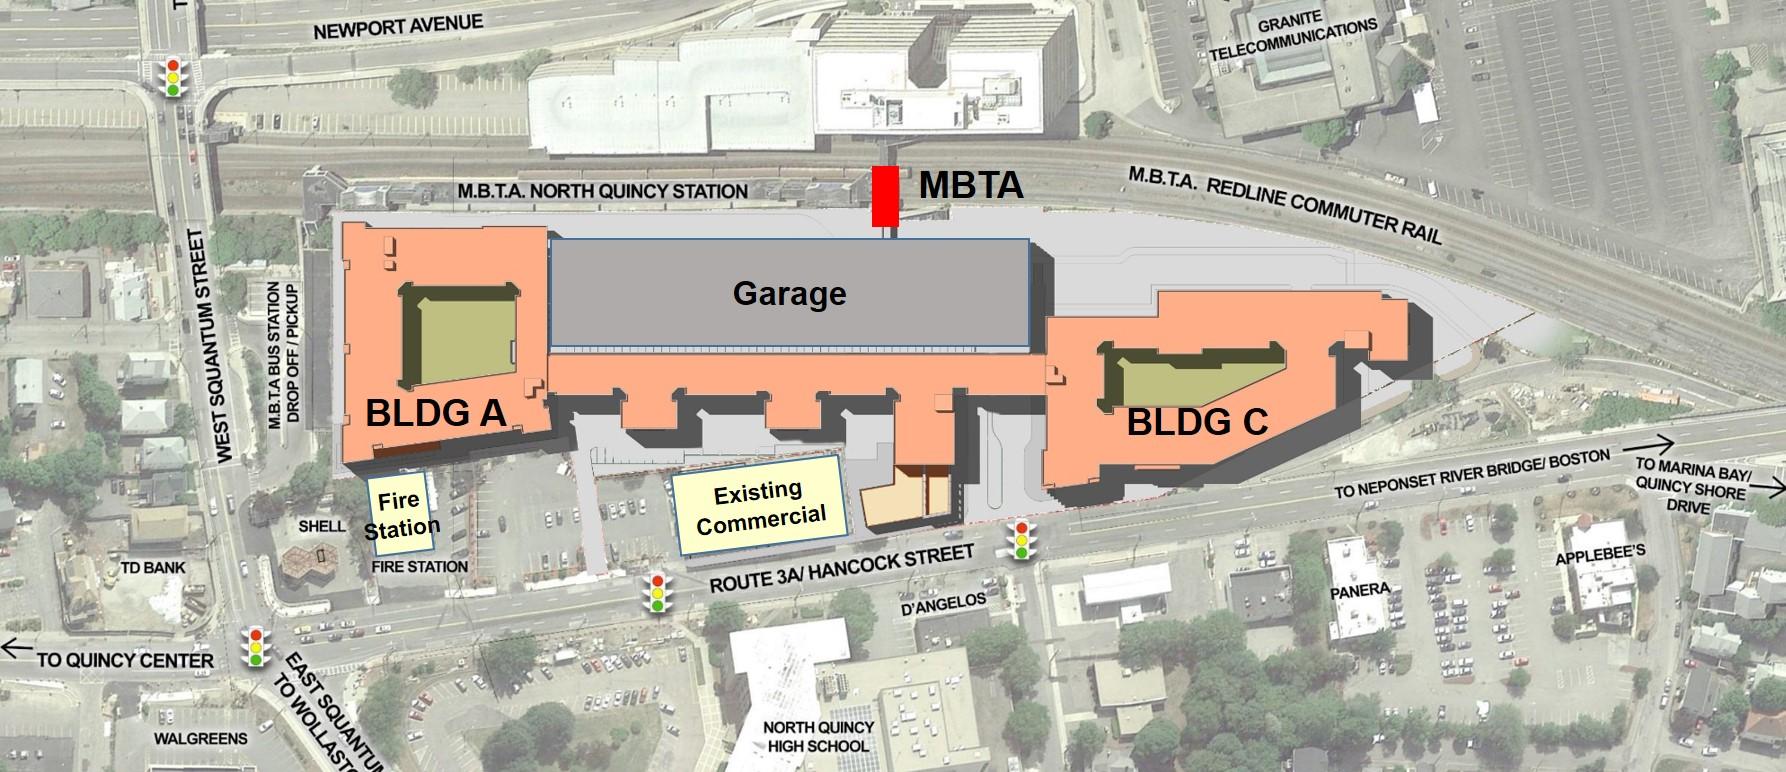 North Quincy construction site map for new garage and buildings